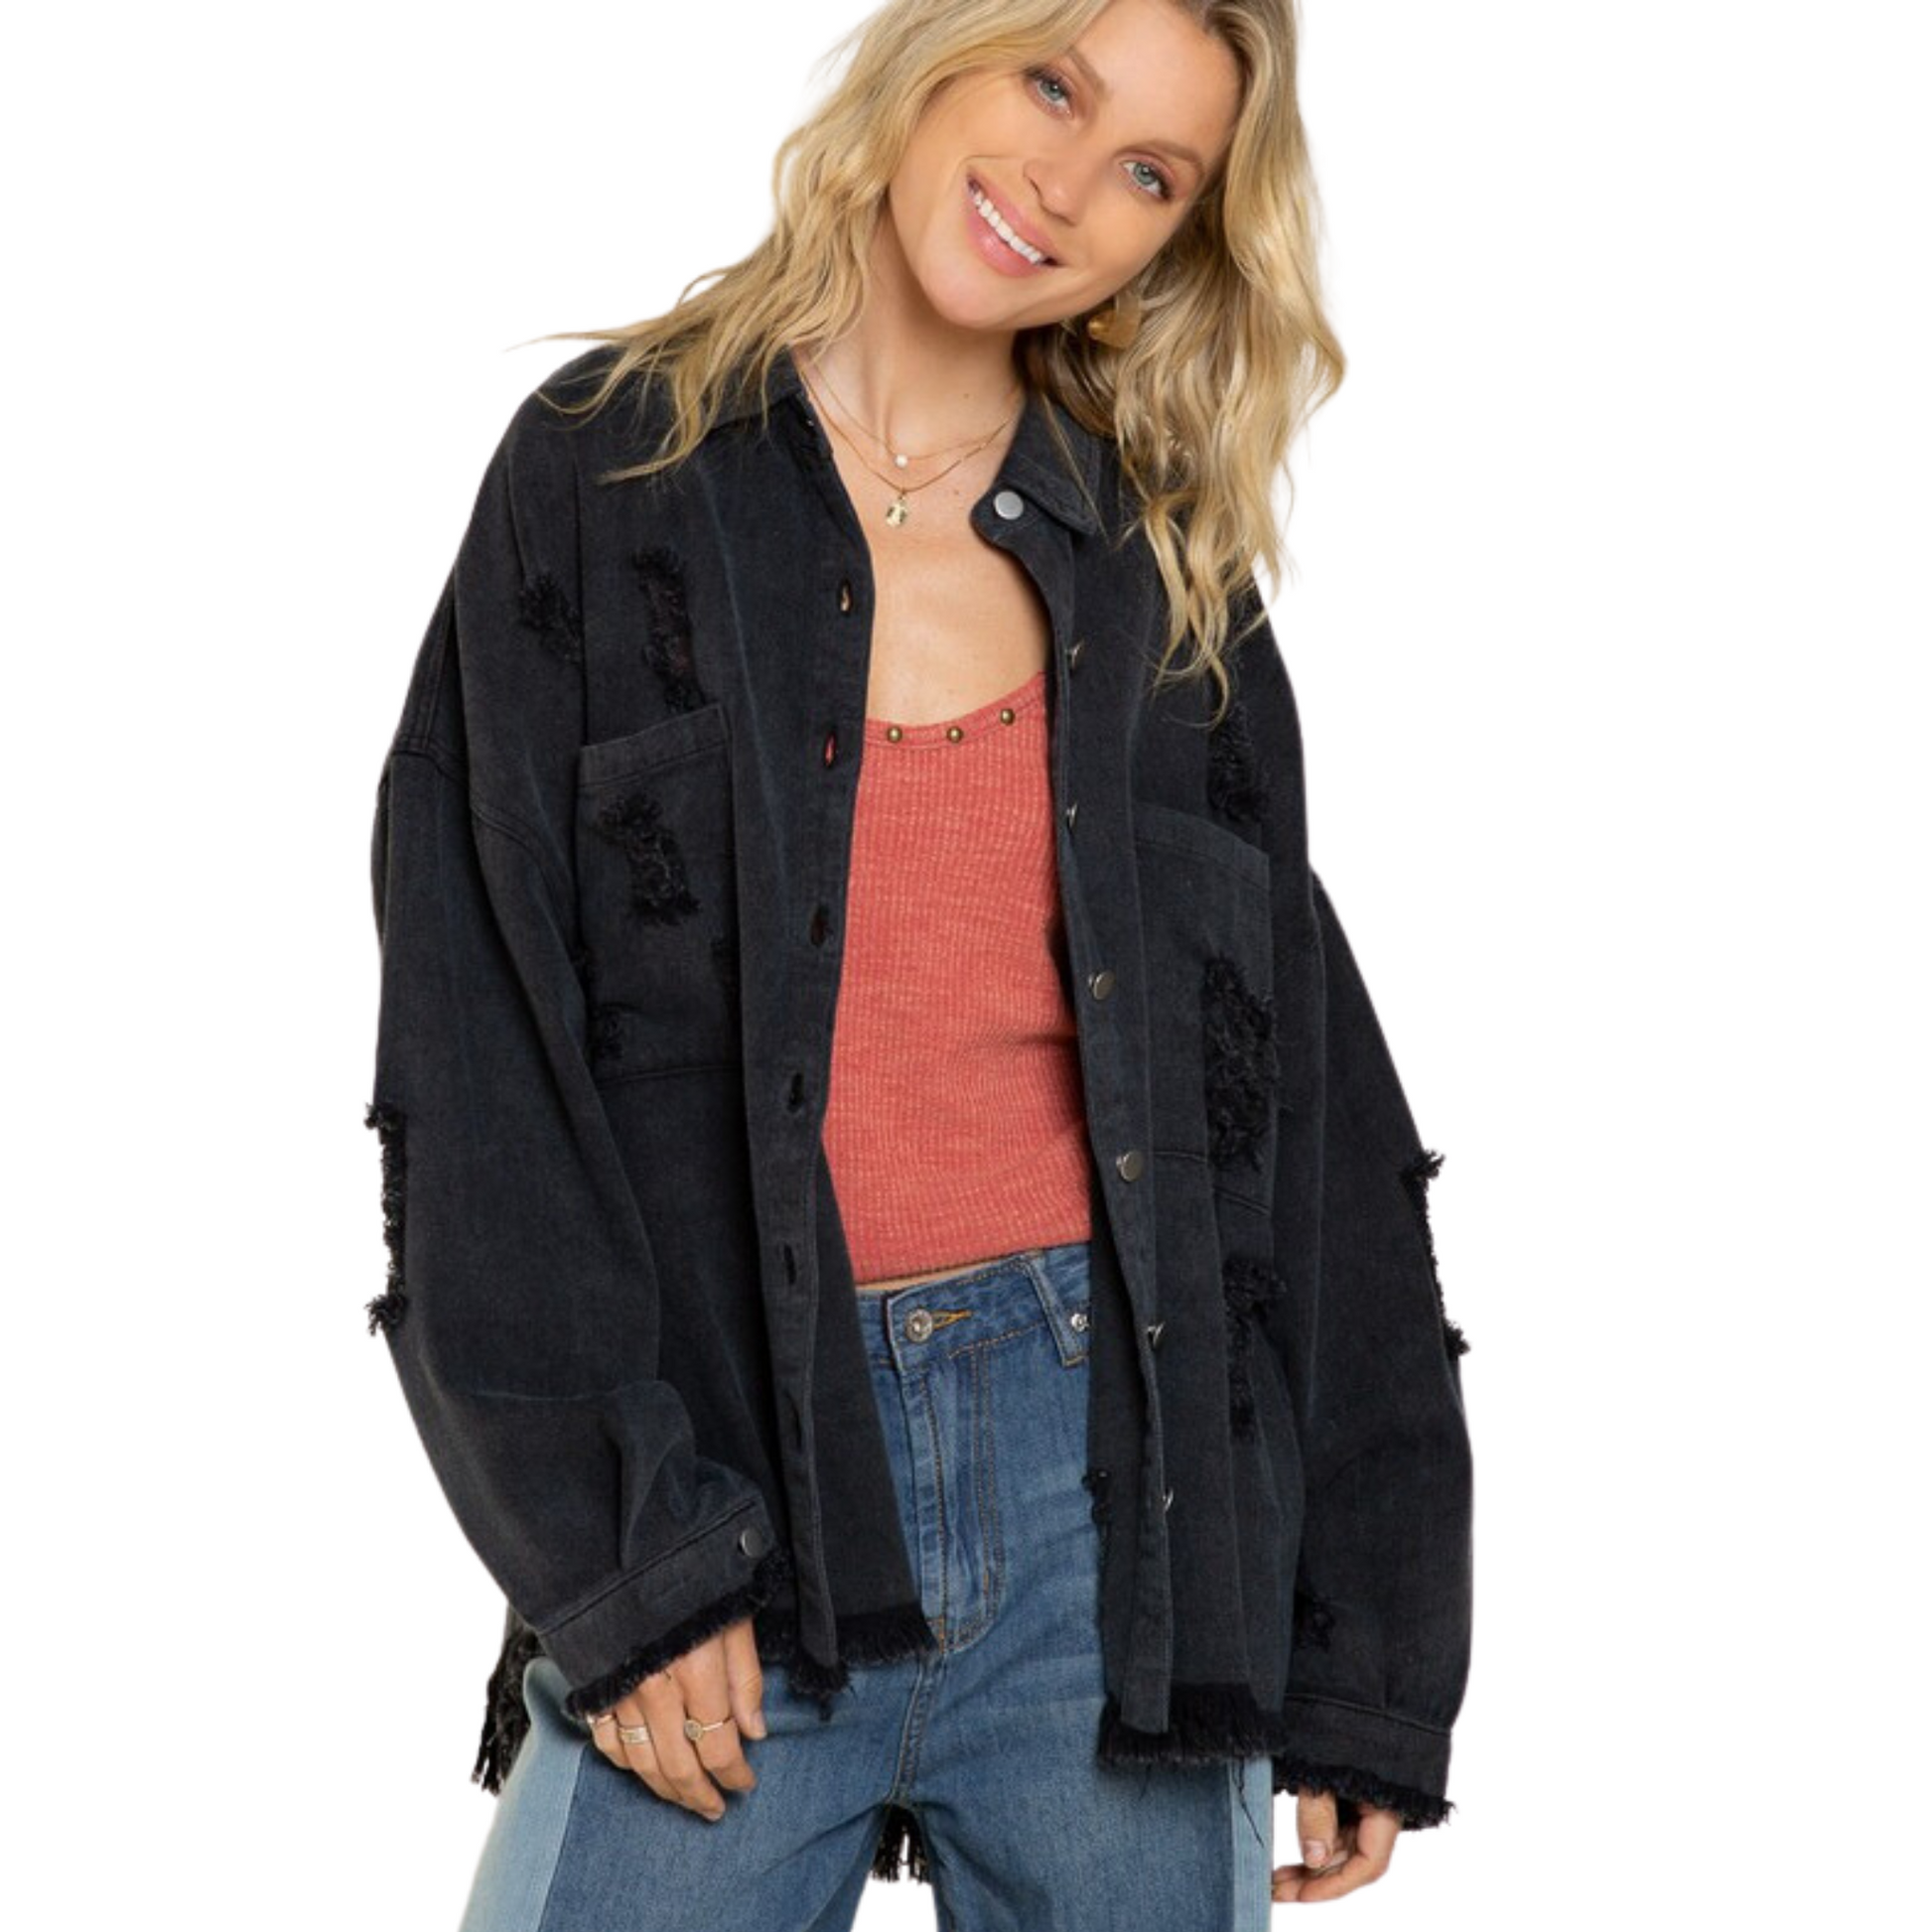 This fashionable Black Denim Jacket is made with high-quality black denim material for durability and comfort. It features a classic button up style and is available in regular sizes. Perfect for any occasion, this timeless piece will add style to any wardrobe.